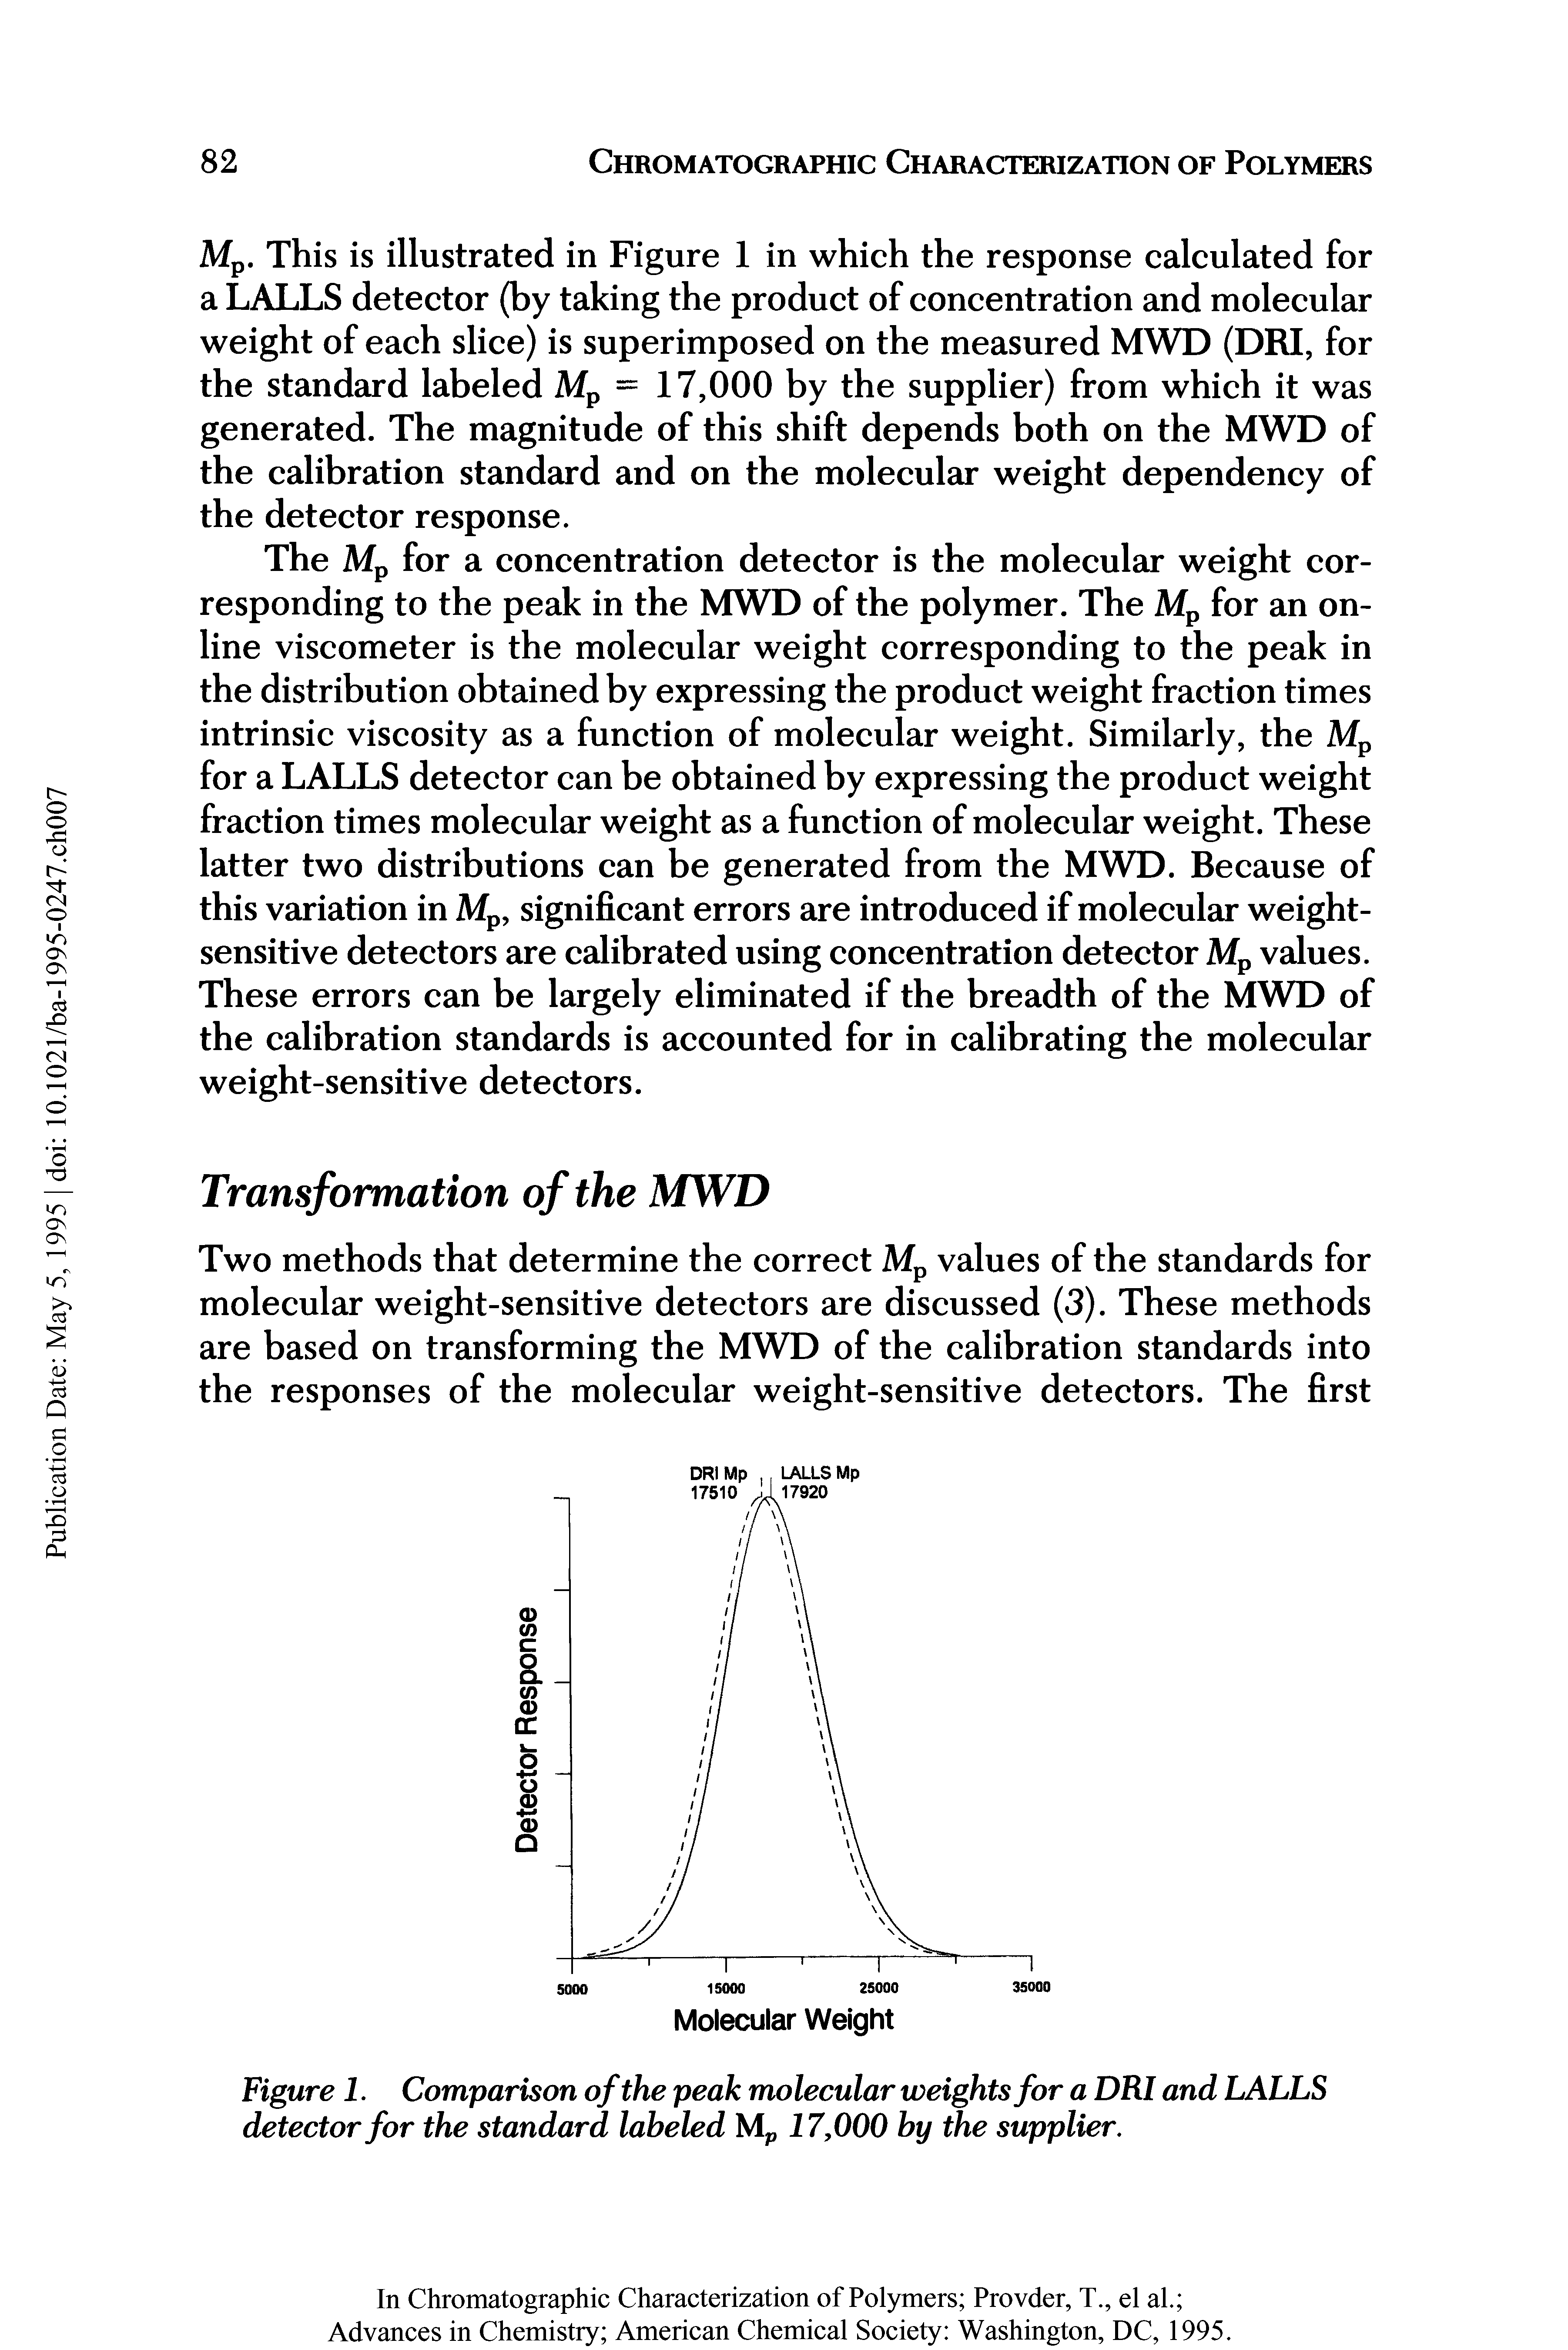 Figure 1. Comparison of the peak molecular weights for a DRI and LALLS detector for the standard labeled Mp 17,000 by the supplier.